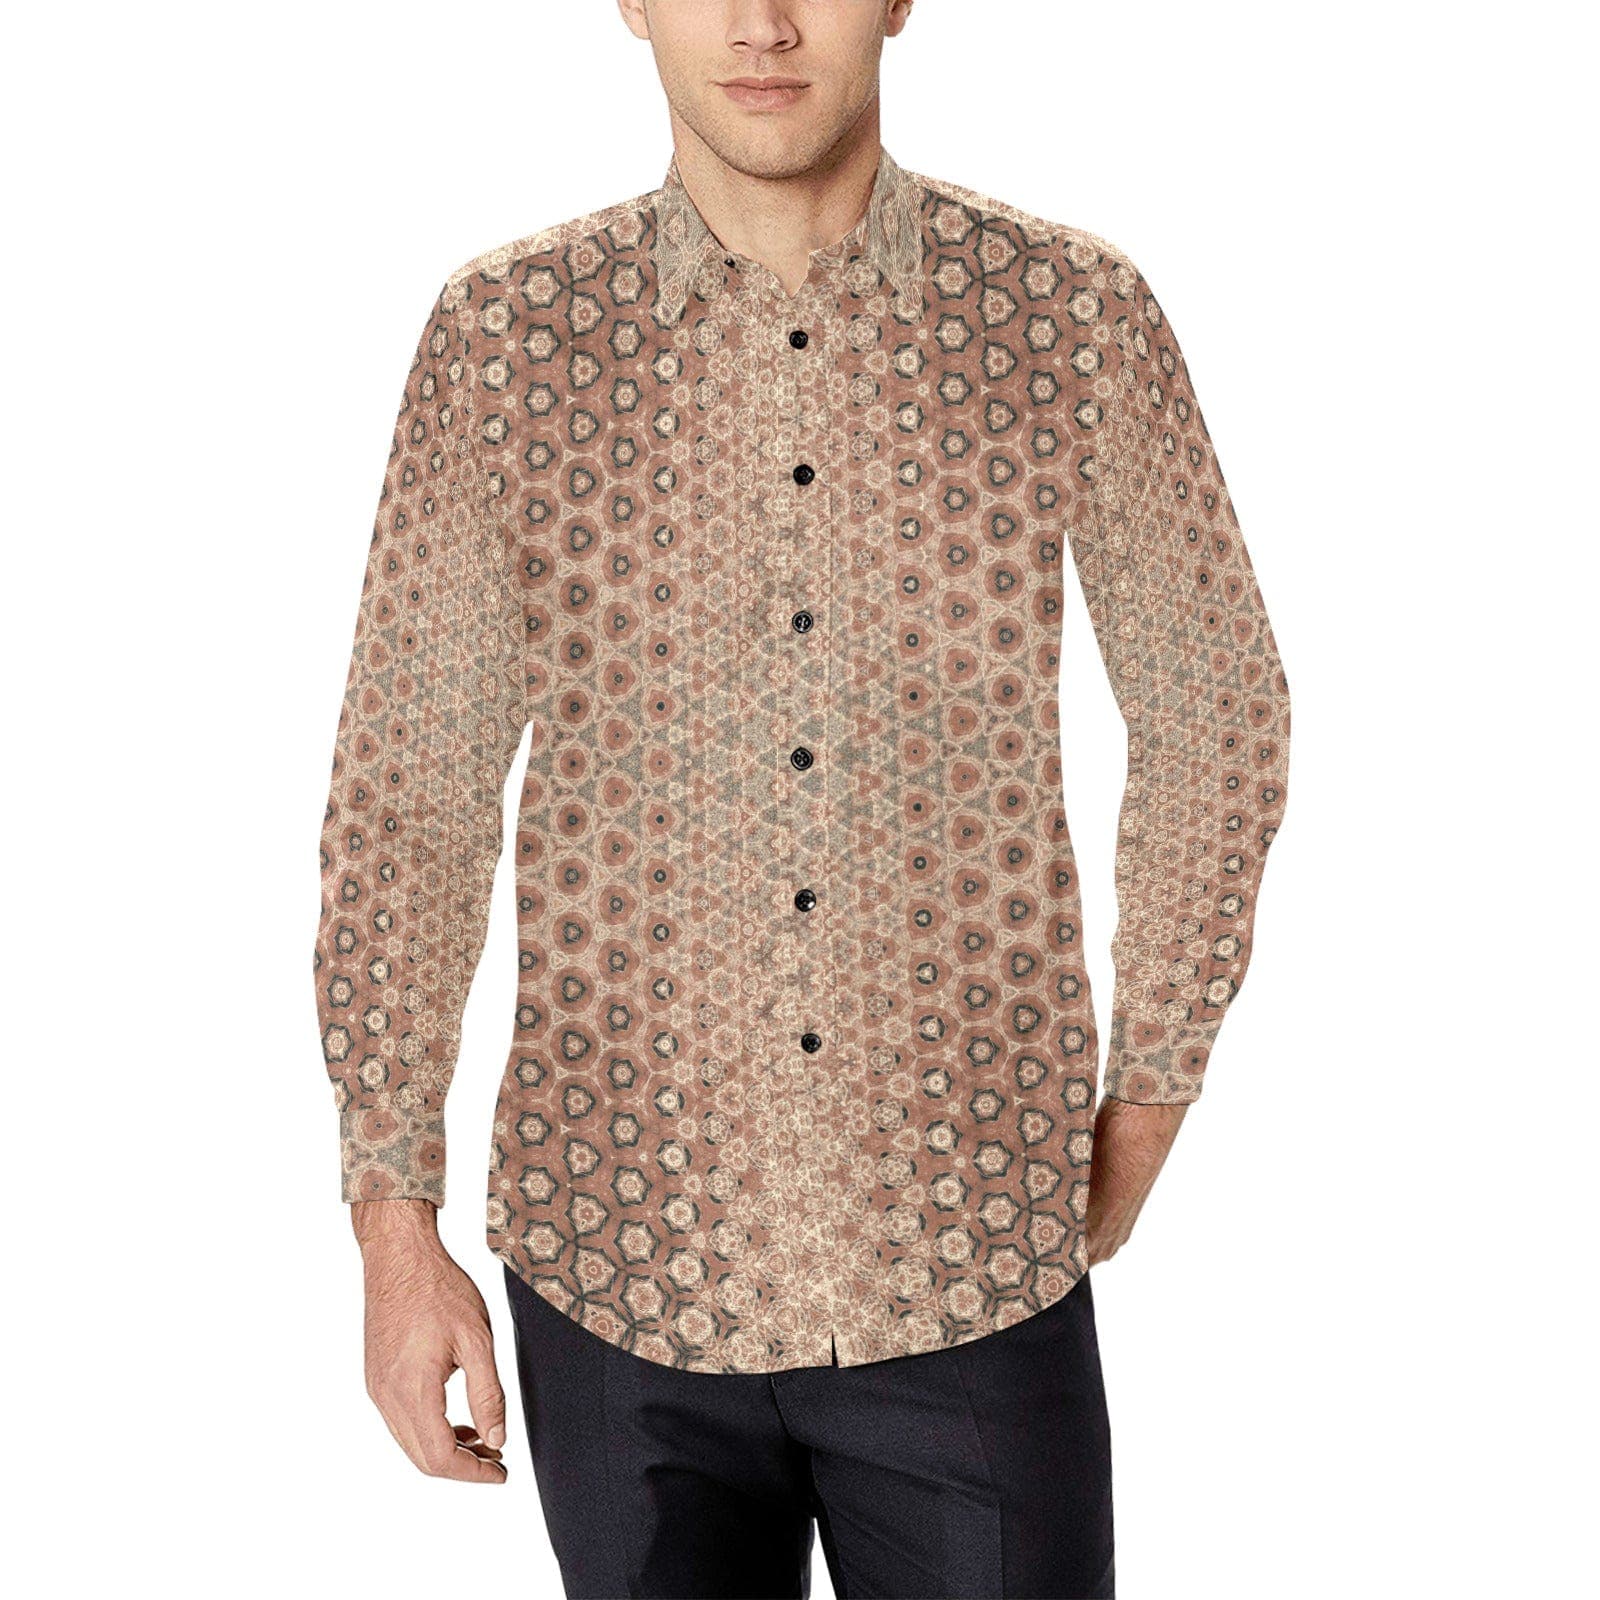 Summernight City Peach and Brown Fantasy Patterned Party Shirt for Men  Long Sleeve Shirt (Without Pocket)